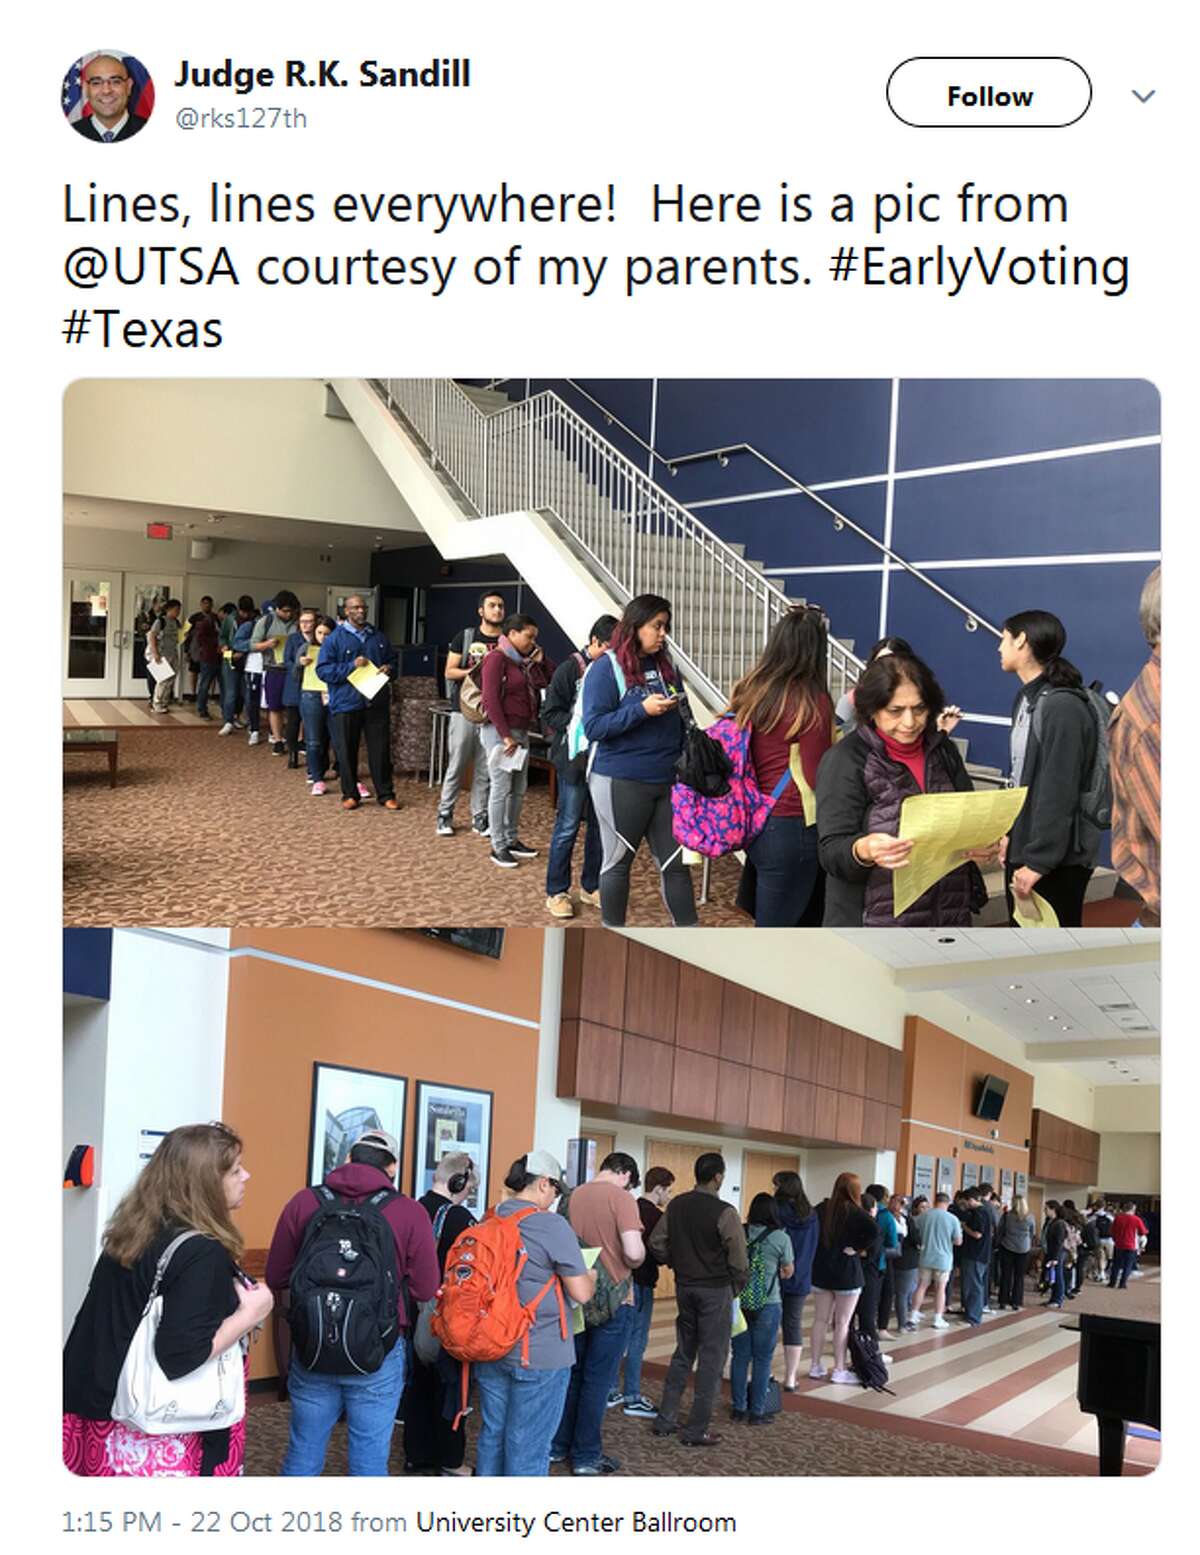 @rks127th: Lines, lines everywhere! Here is a pic from @UTSA courtesy of my parents. #EarlyVoting #Texas